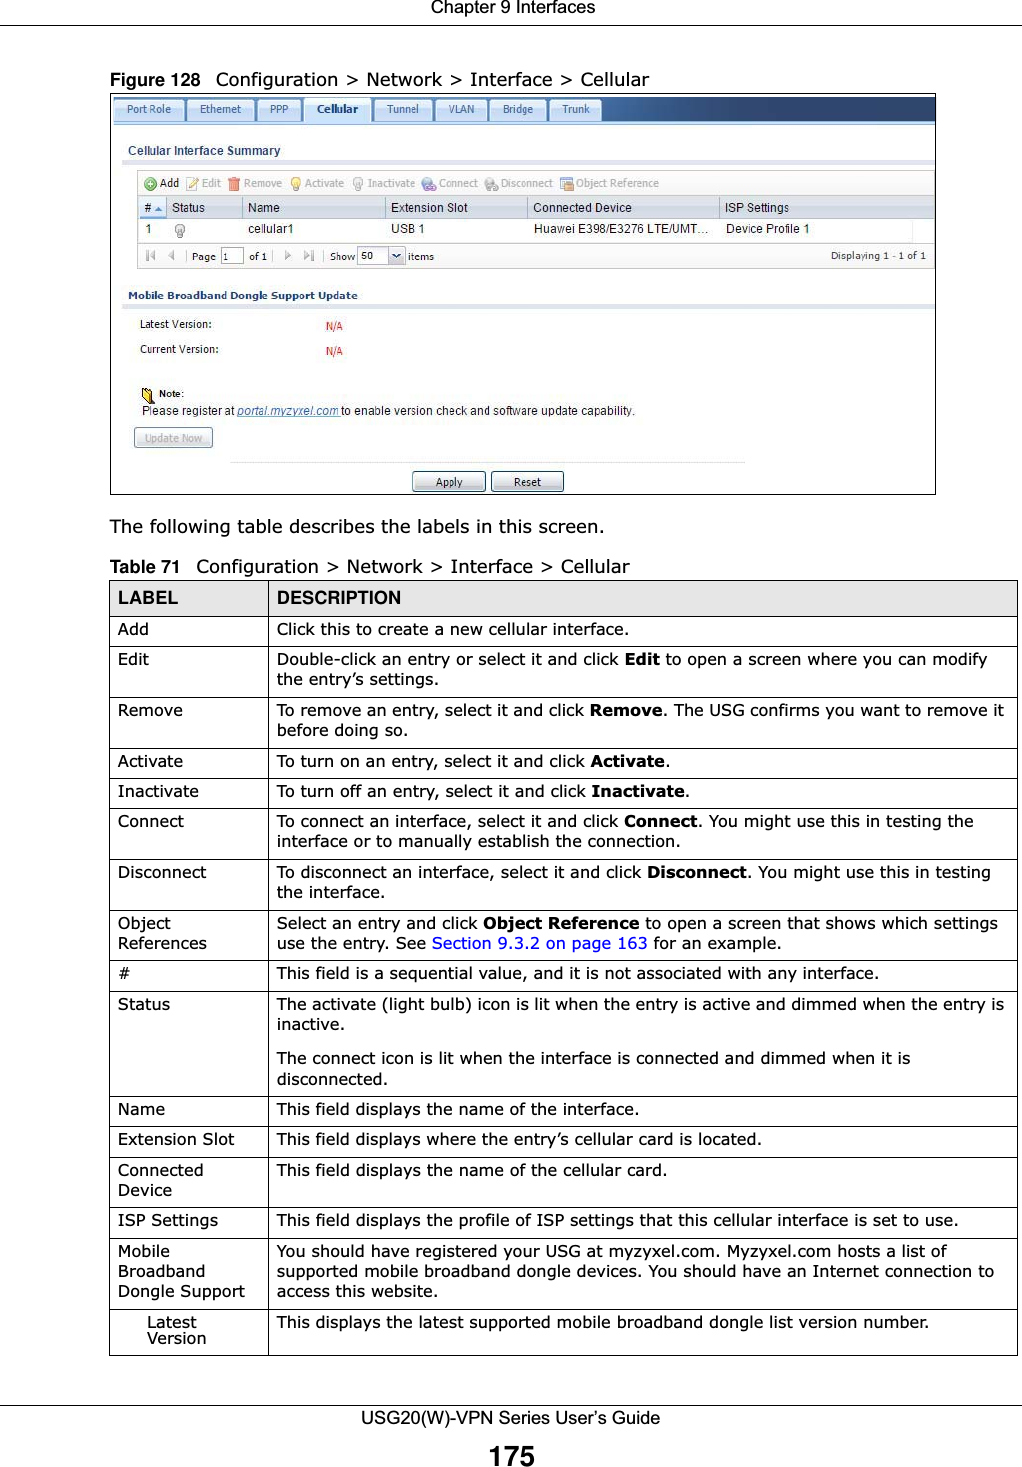  Chapter 9 InterfacesUSG20(W)-VPN Series User’s Guide175Figure 128   Configuration &gt; Network &gt; Interface &gt; Cellular   The following table describes the labels in this screen.Table 71   Configuration &gt; Network &gt; Interface &gt; CellularLABEL DESCRIPTIONAdd Click this to create a new cellular interface.Edit Double-click an entry or select it and click Edit to open a screen where you can modify the entry’s settings. Remove To remove an entry, select it and click Remove. The USG confirms you want to remove it before doing so.Activate To turn on an entry, select it and click Activate.Inactivate To turn off an entry, select it and click Inactivate.Connect To connect an interface, select it and click Connect. You might use this in testing the interface or to manually establish the connection.Disconnect To disconnect an interface, select it and click Disconnect. You might use this in testing the interface.Object ReferencesSelect an entry and click Object Reference to open a screen that shows which settings use the entry. See Section 9.3.2 on page 163 for an example.# This field is a sequential value, and it is not associated with any interface.Status The activate (light bulb) icon is lit when the entry is active and dimmed when the entry is inactive.The connect icon is lit when the interface is connected and dimmed when it is disconnected.Name This field displays the name of the interface.Extension Slot This field displays where the entry’s cellular card is located.Connected DeviceThis field displays the name of the cellular card.ISP Settings This field displays the profile of ISP settings that this cellular interface is set to use.Mobile Broadband Dongle SupportYou should have registered your USG at myzyxel.com. Myzyxel.com hosts a list of supported mobile broadband dongle devices. You should have an Internet connection to access this website.Latest Version This displays the latest supported mobile broadband dongle list version number.